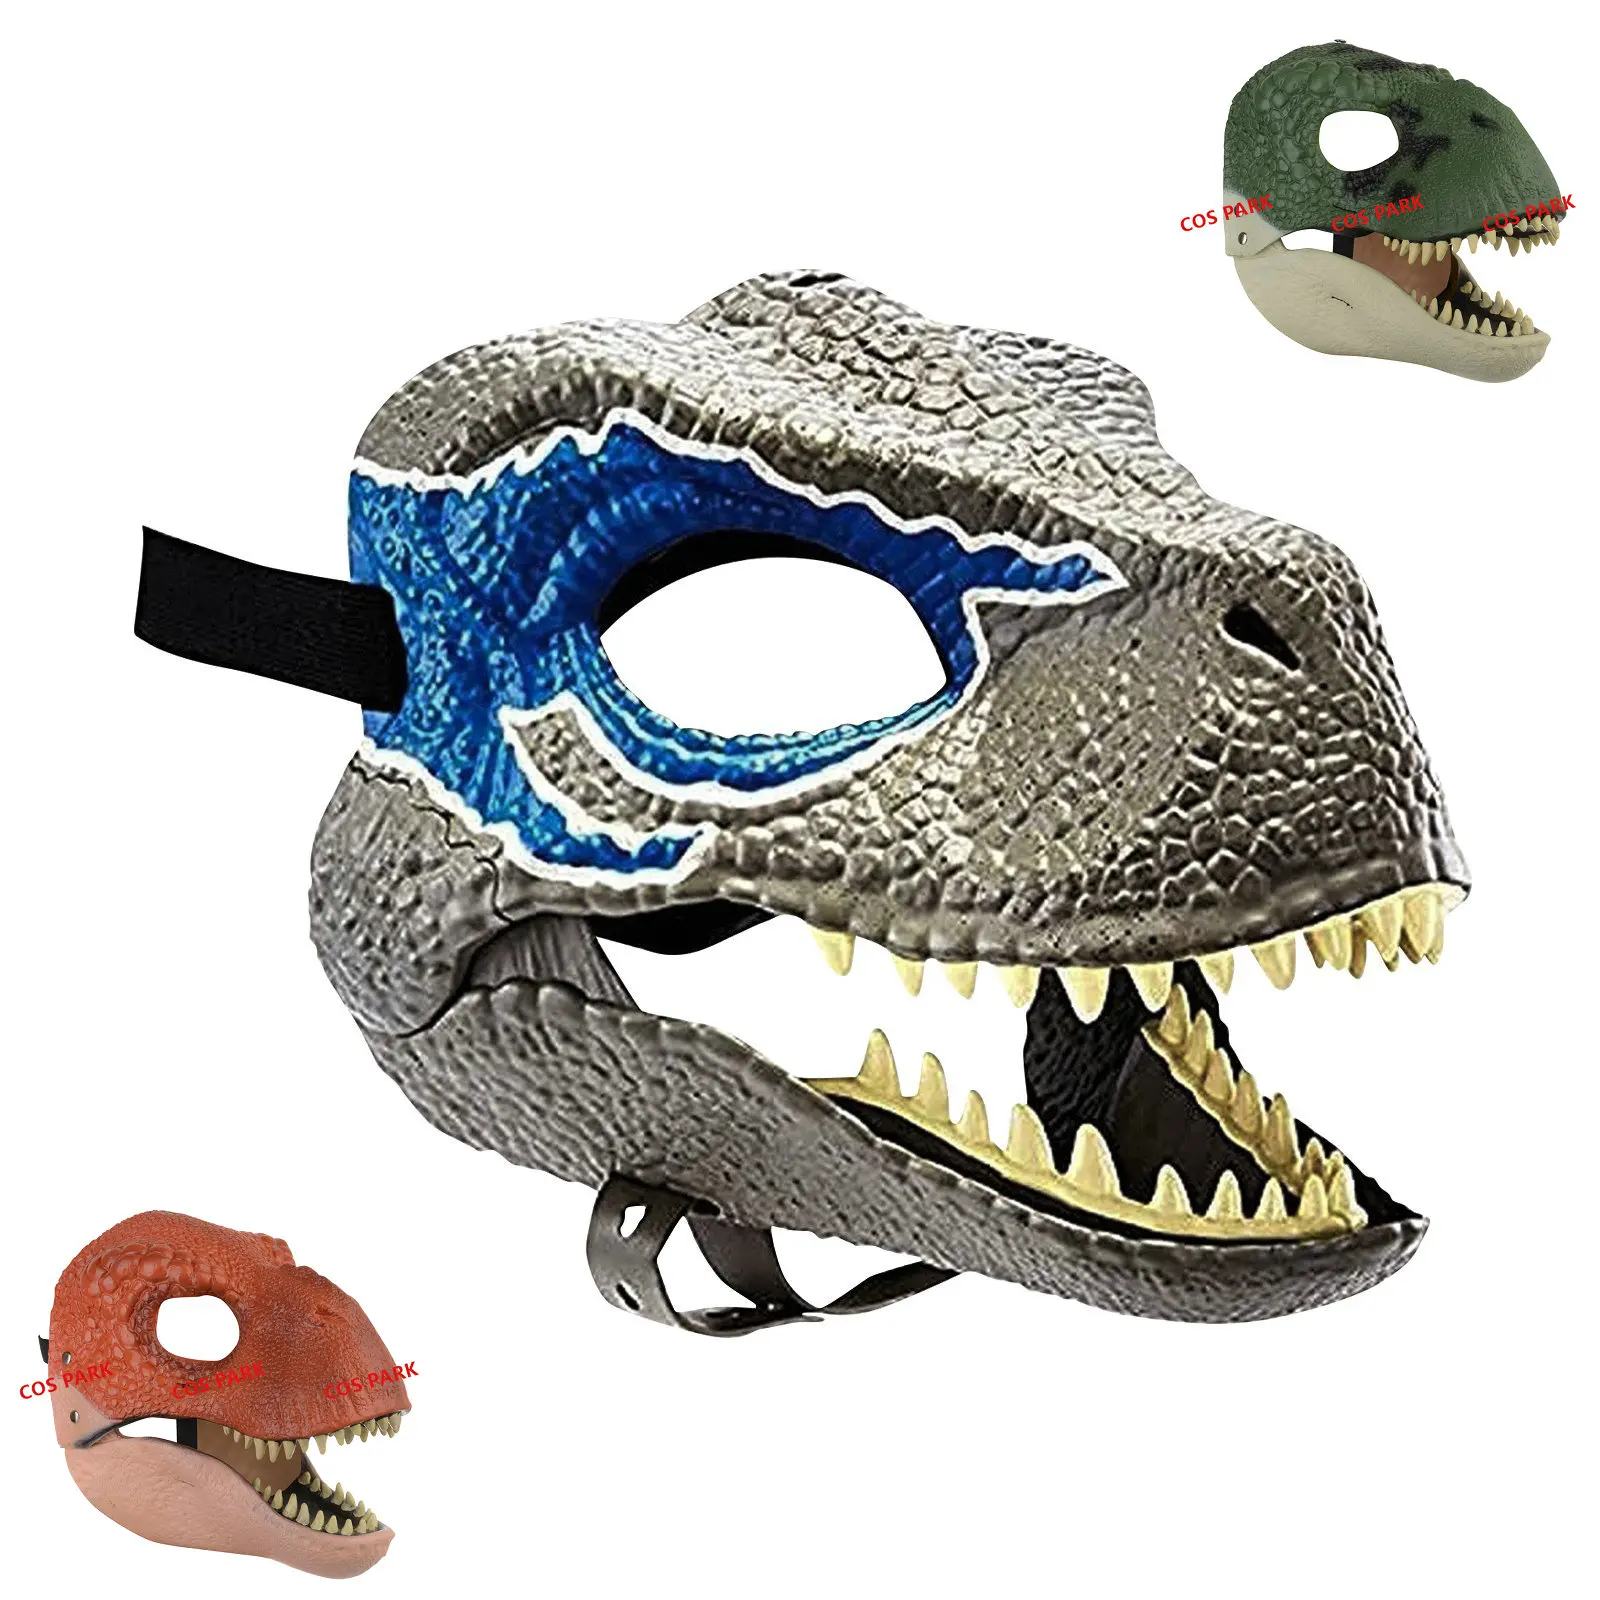 Dragon Dinosaur Mask Open Mouth Latex Horror Dinosaur Headgear Movable Halloween Party Cosplay Costume Moving Jaw Halloween Face